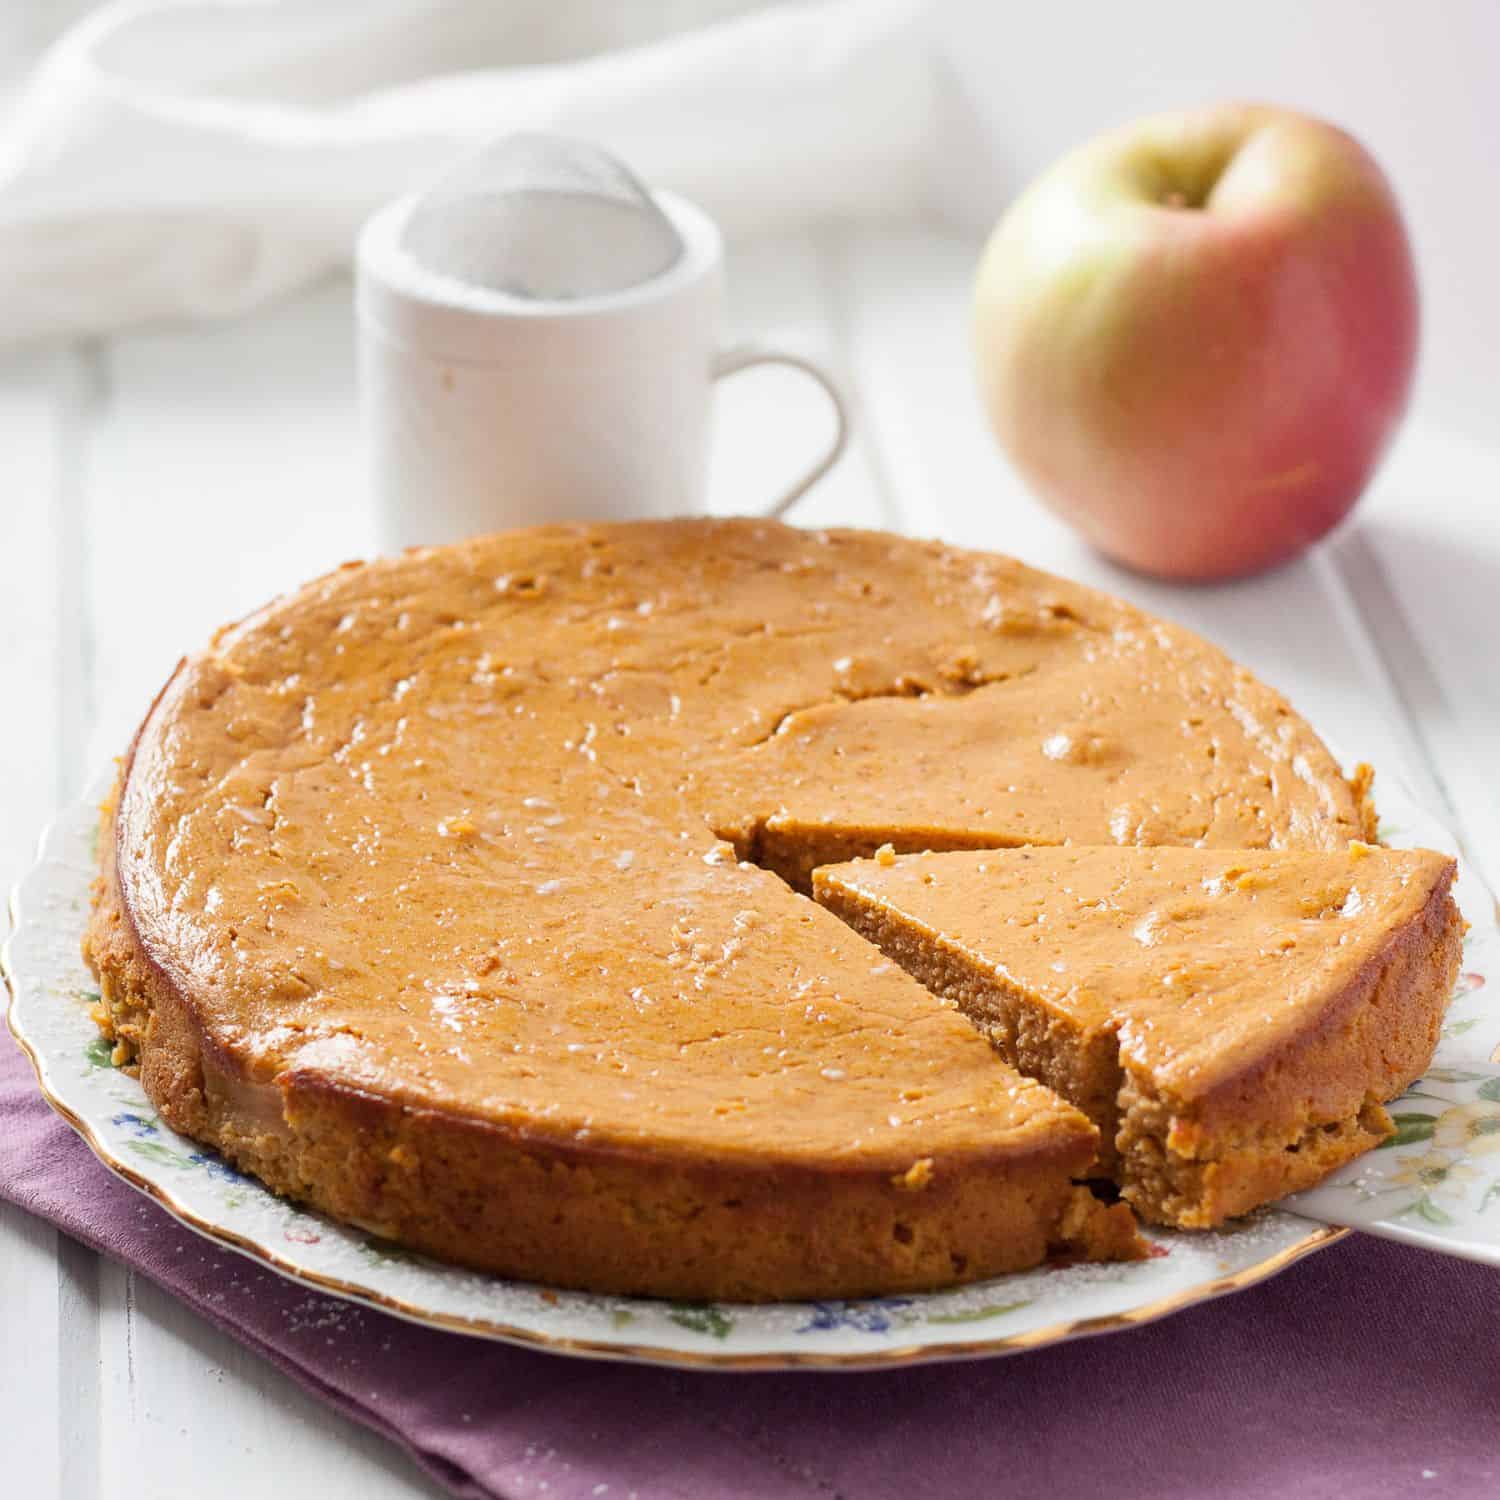 Gluten free plantain apple cake you make in the BLENDER! Easy, refined sugar free, option included for oil free, and paleo-approved.